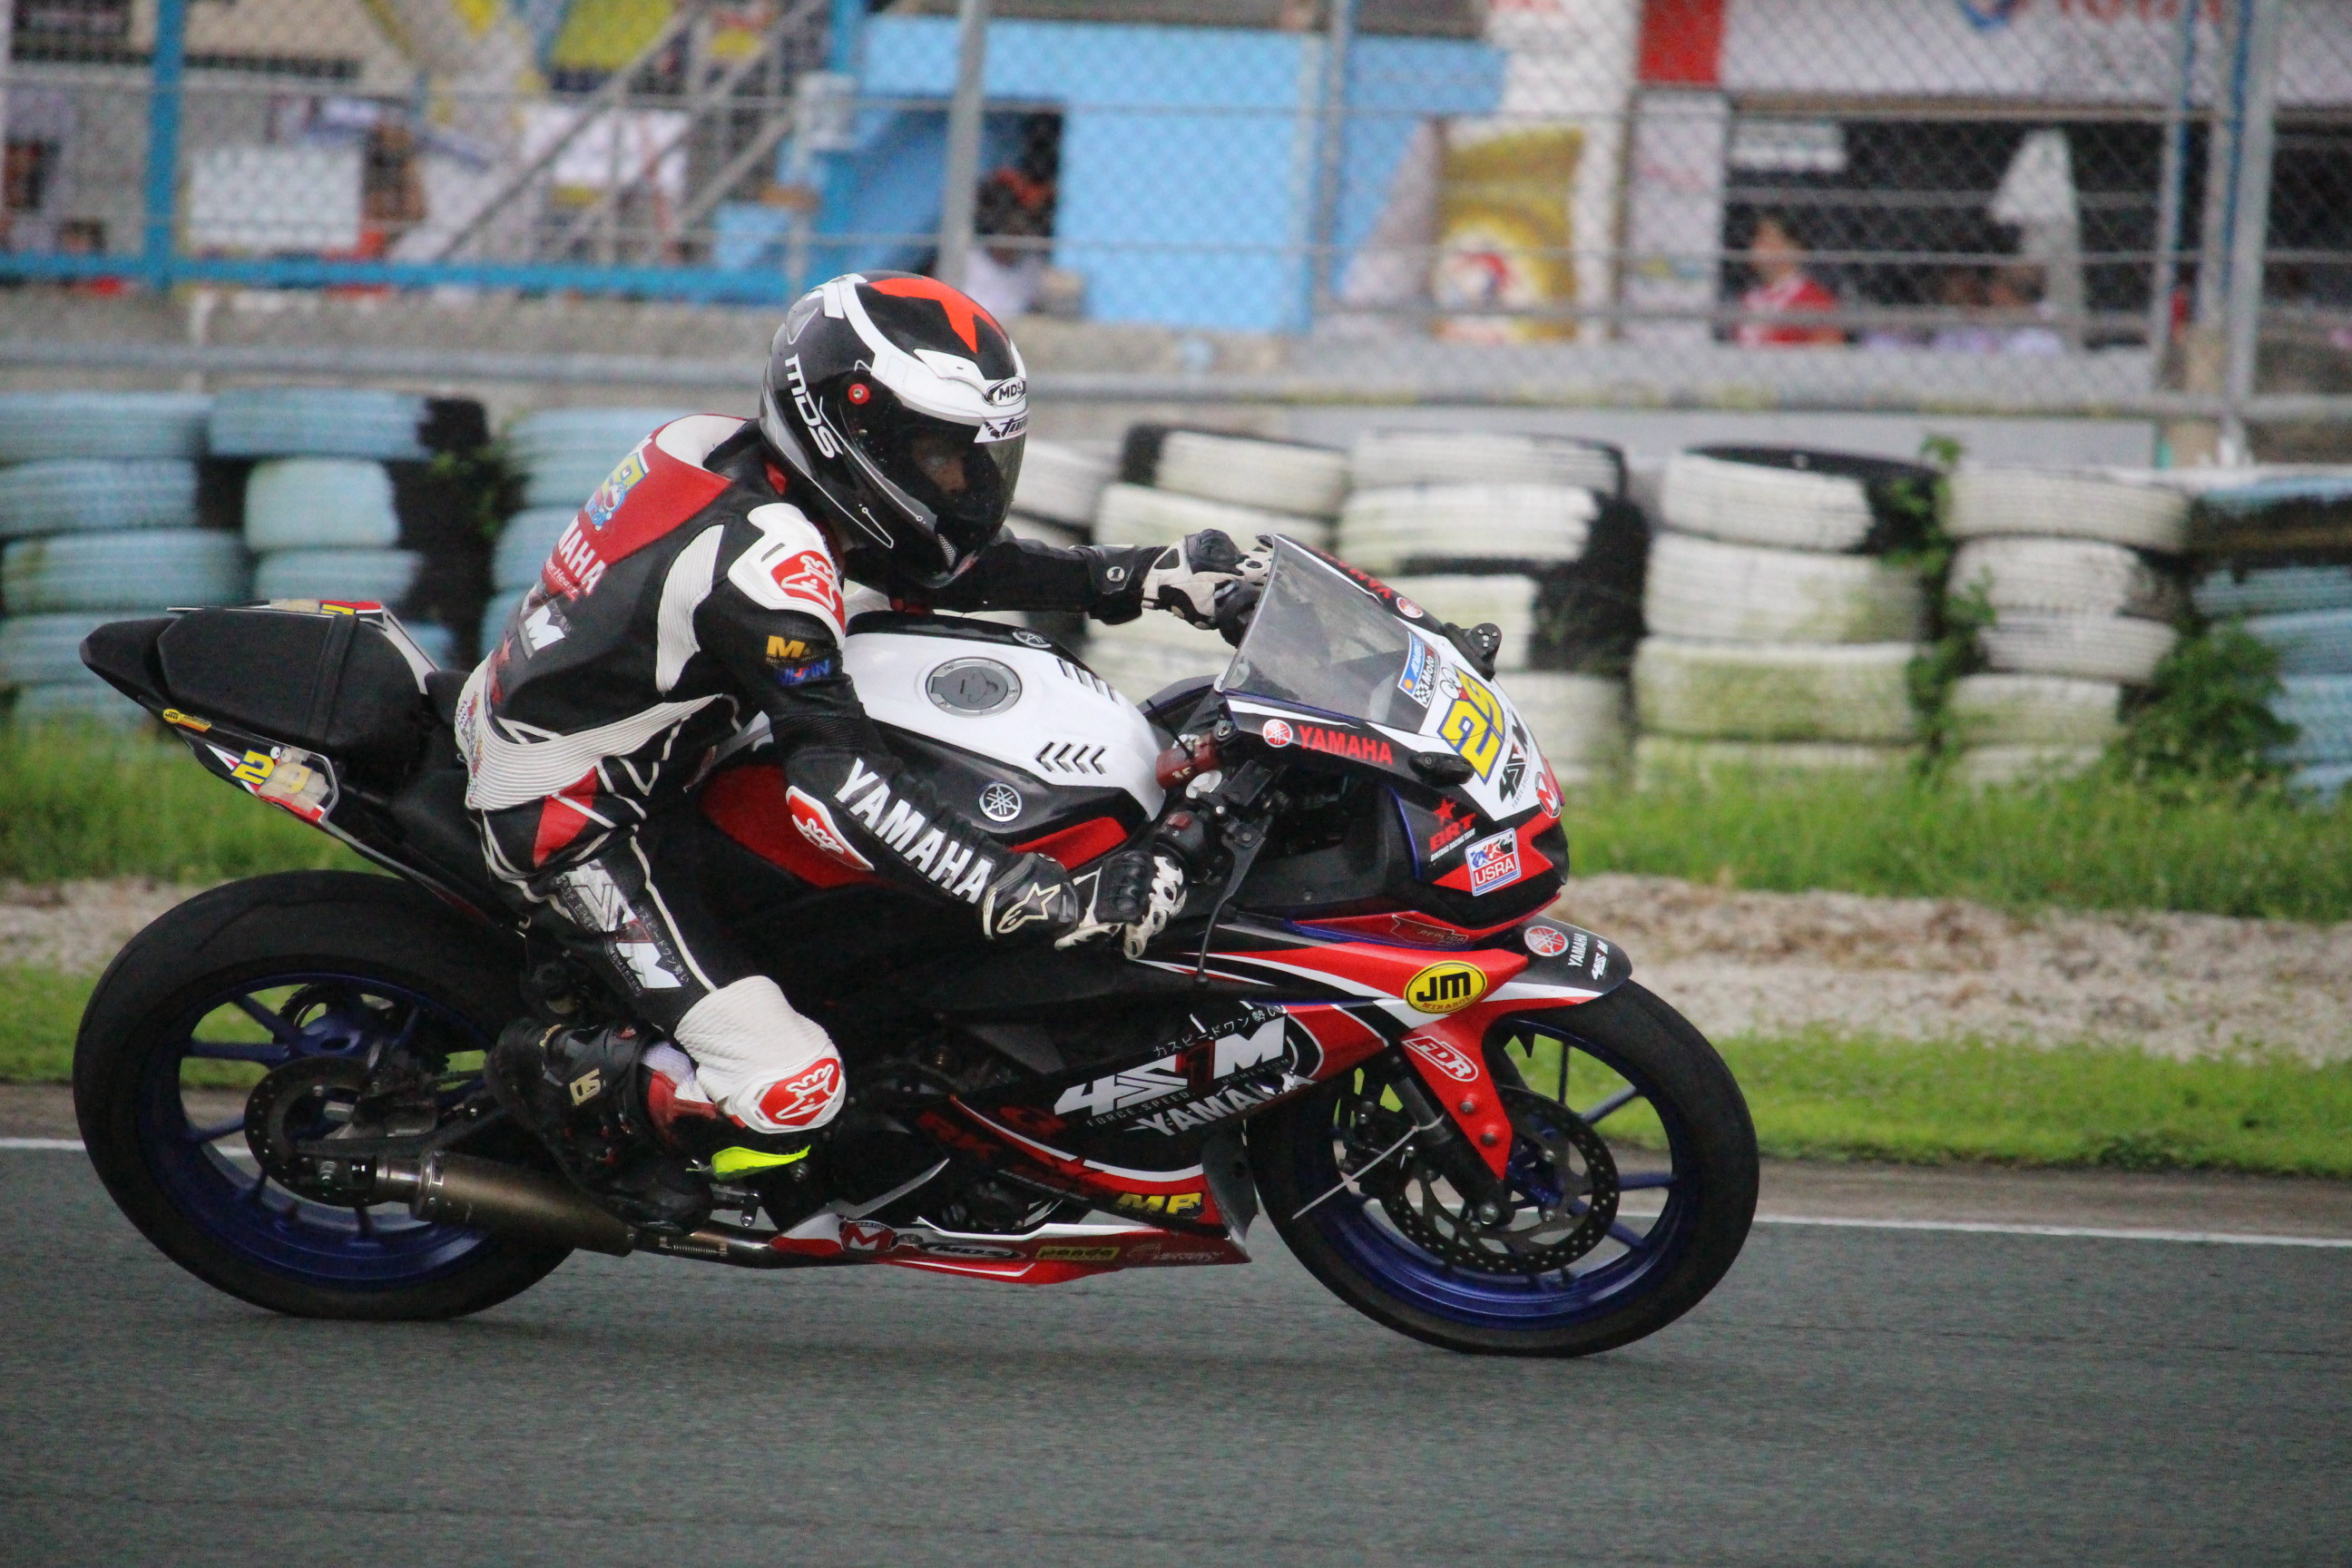 4S1M-Yamaha Eyes Gold Cup in IRGP XI